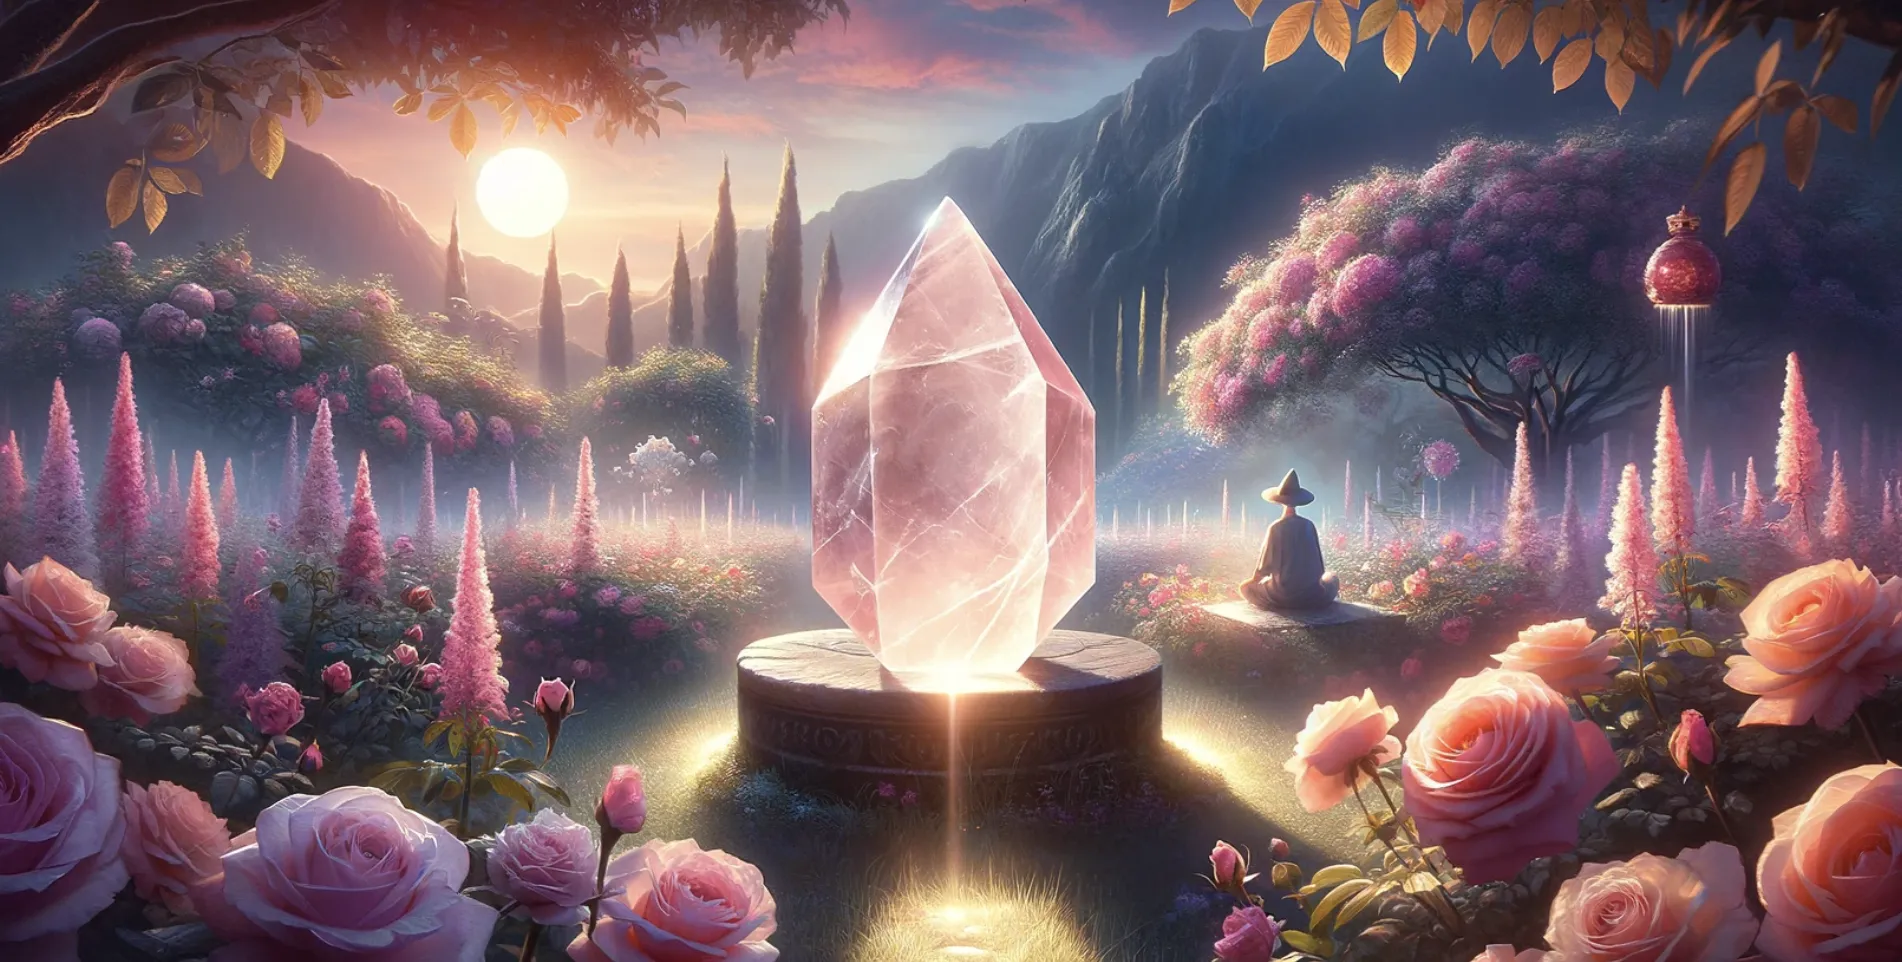 large rose quartz crystal with man meditating in the background